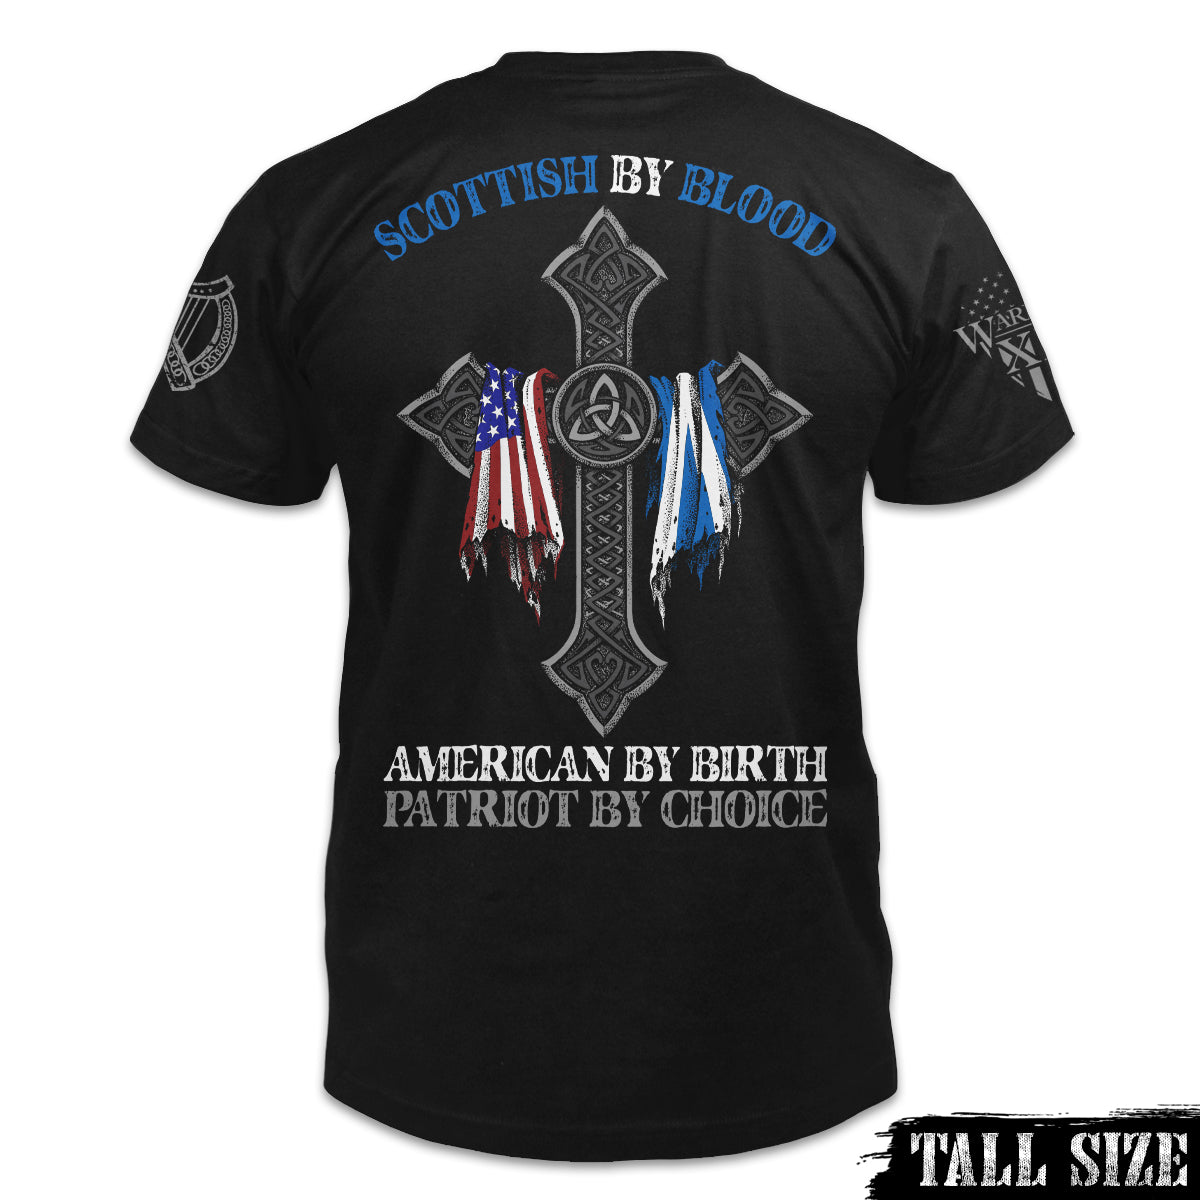 A black tall size shirt with the words "Scottish by blood, American by birth, patriot by choice" with a cross holding the American and Scottish flag printed on the back of the shirt.